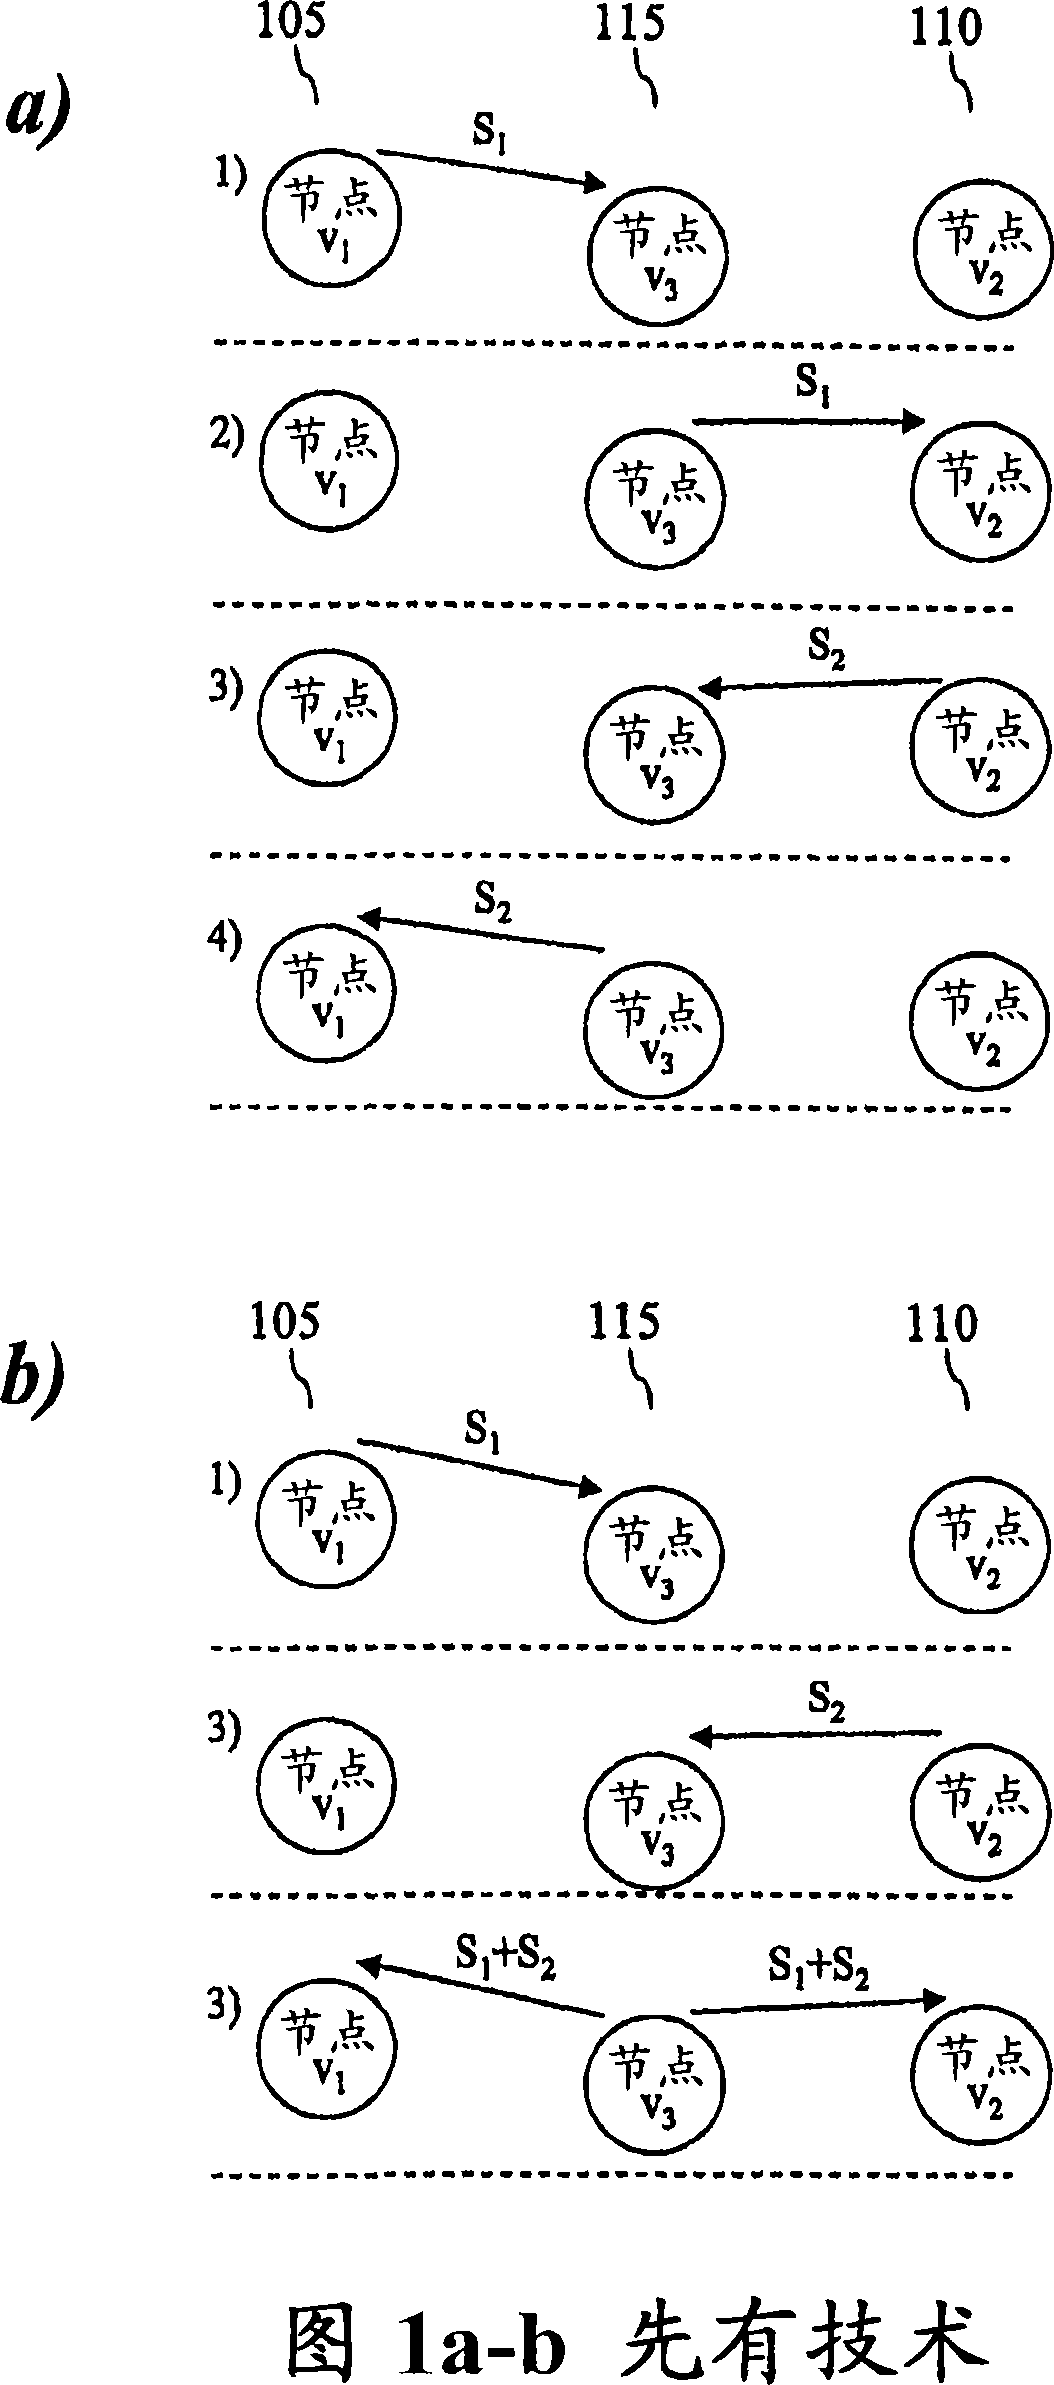 Method and arrangement for bi-directional relaying in wireless communication systems